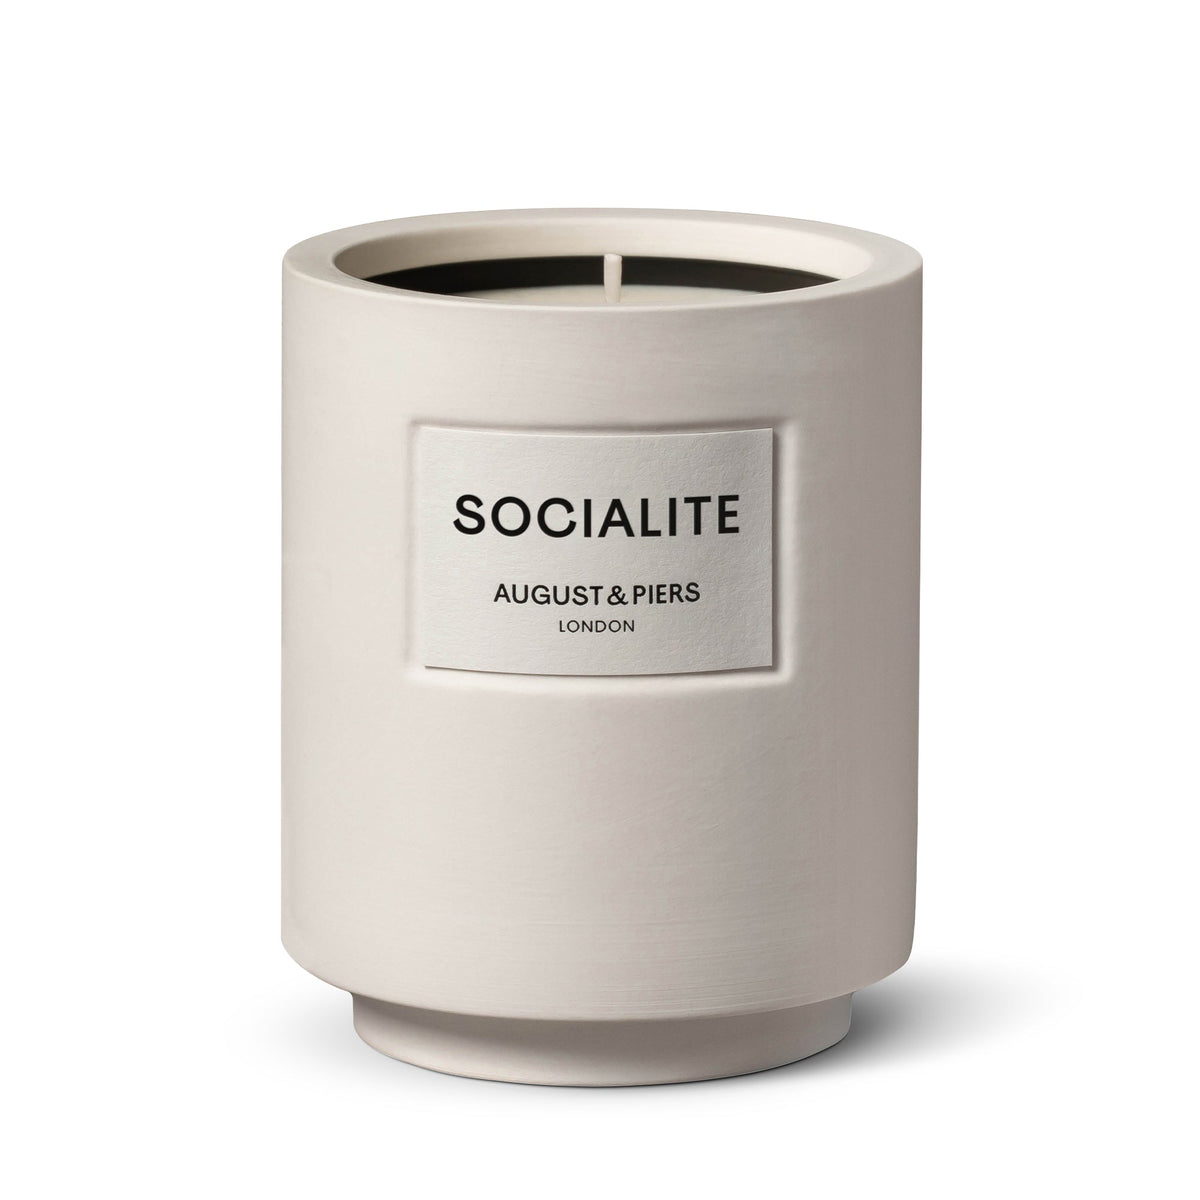 August & Piers Socialite Scented Candle